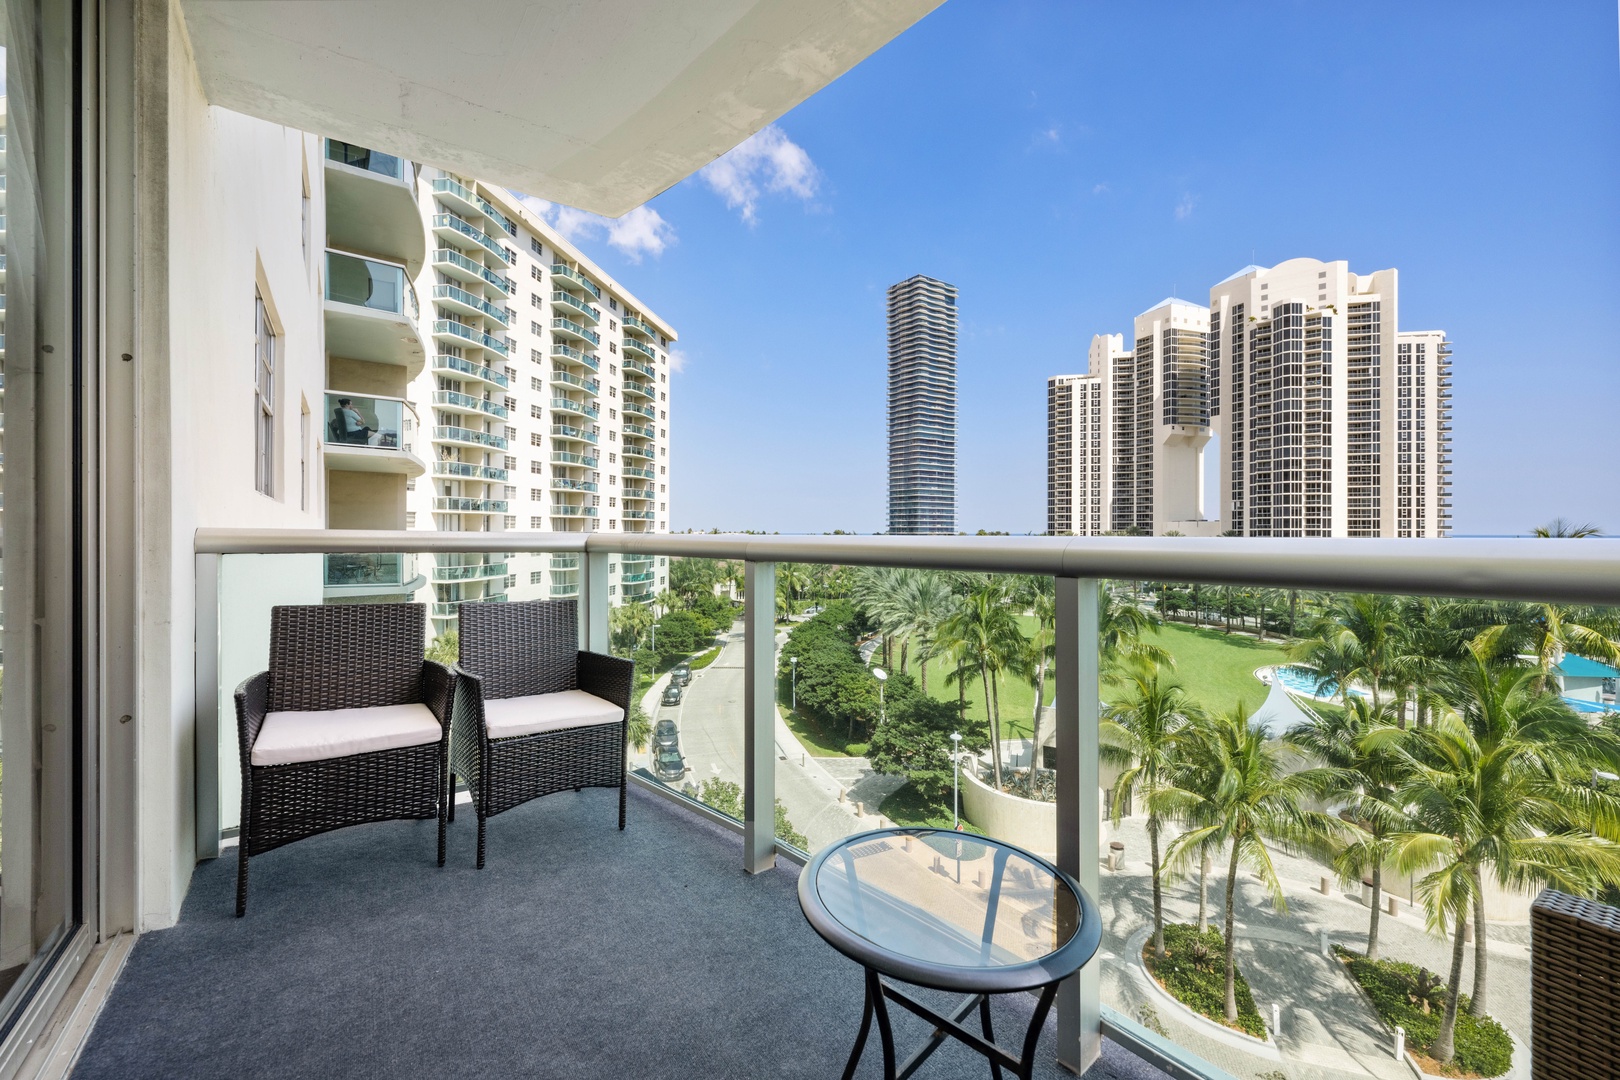 Indulge in the fresh air and stunning views from the balcony